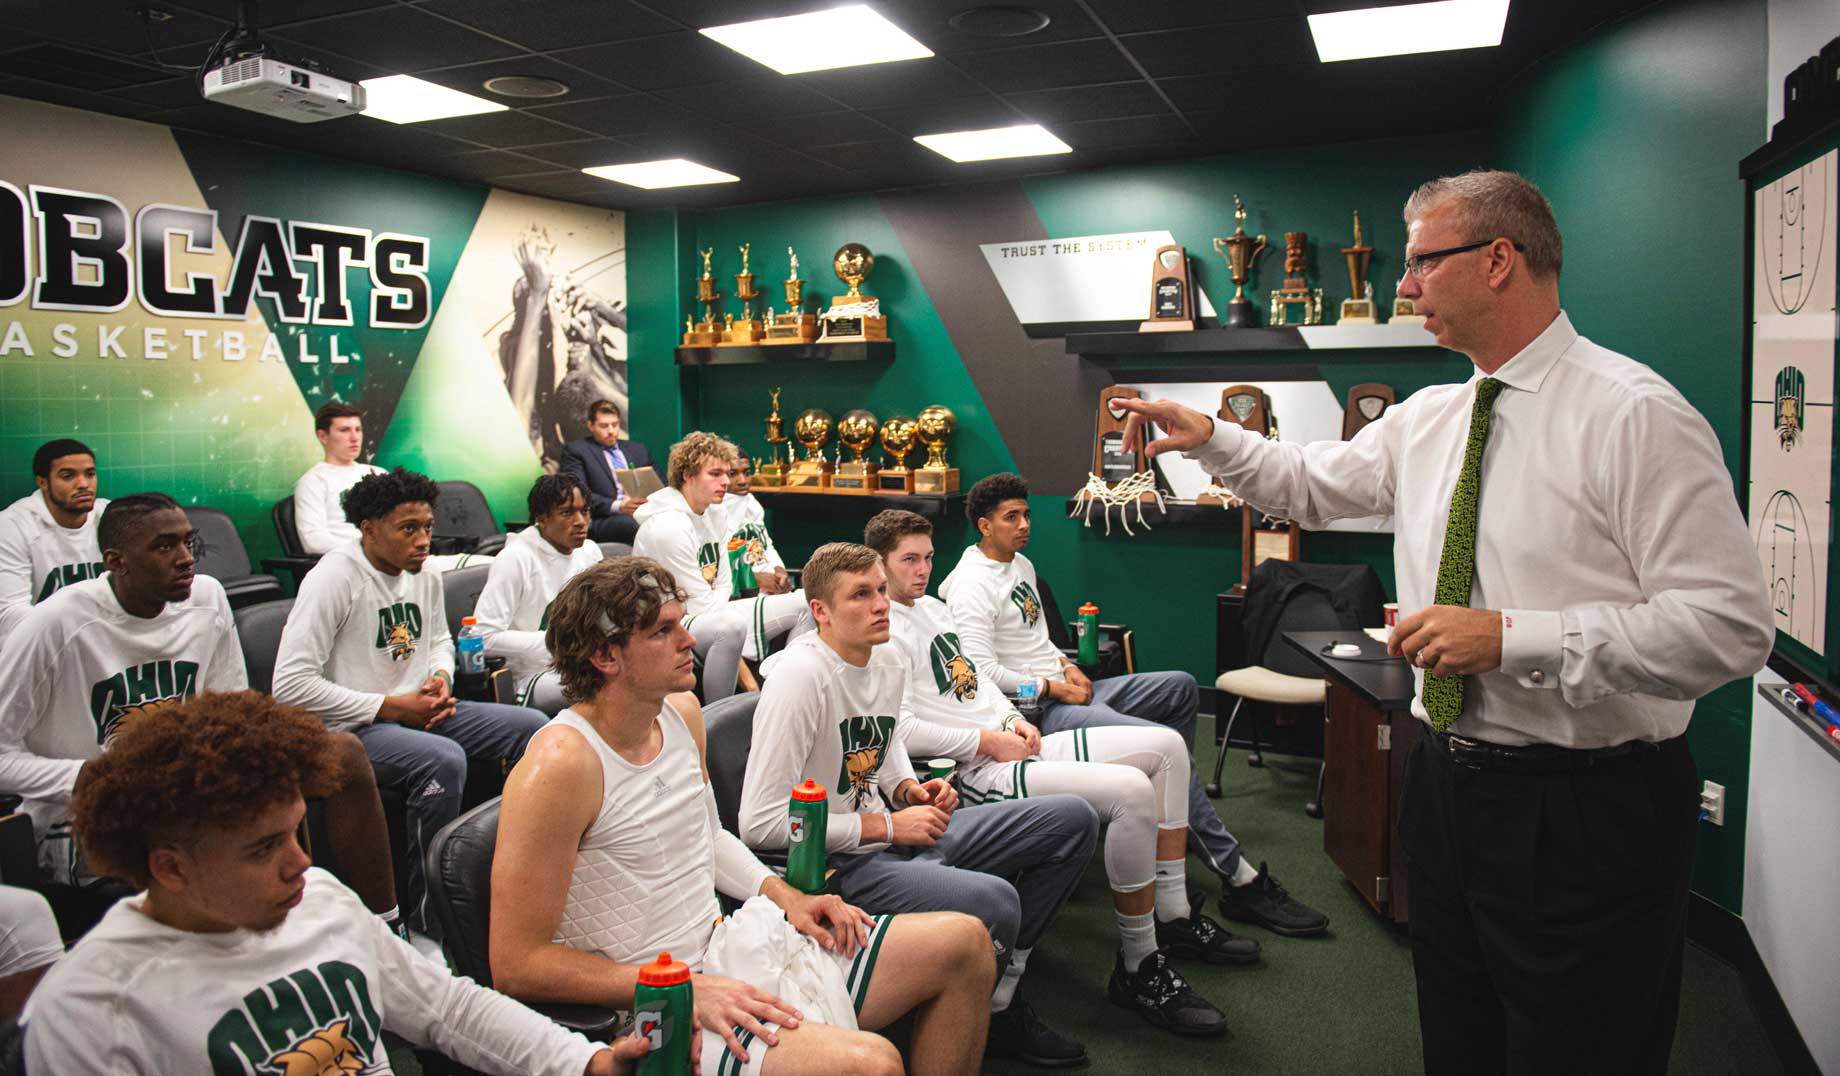 Coach Boals gives a talk to the mens basketball team in the locker room